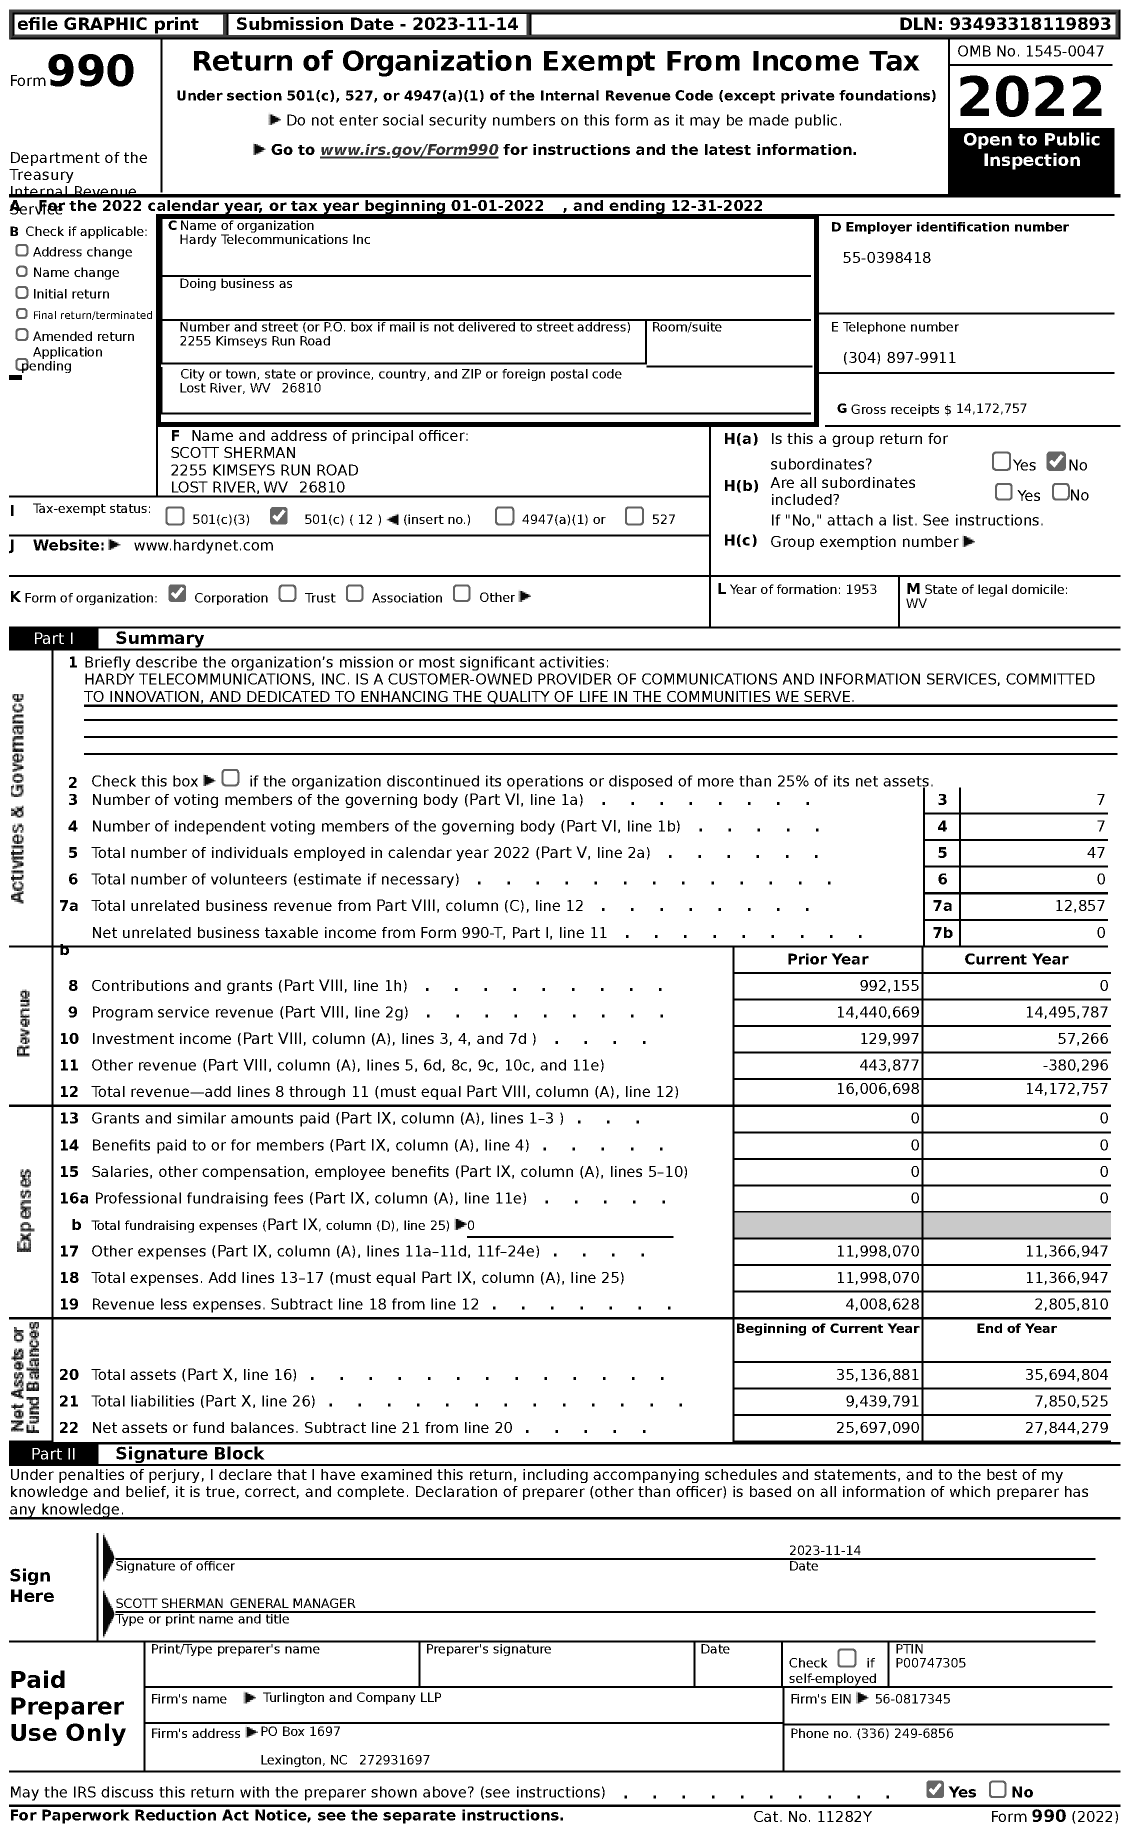 Image of first page of 2022 Form 990 for Hardy Telecommunications